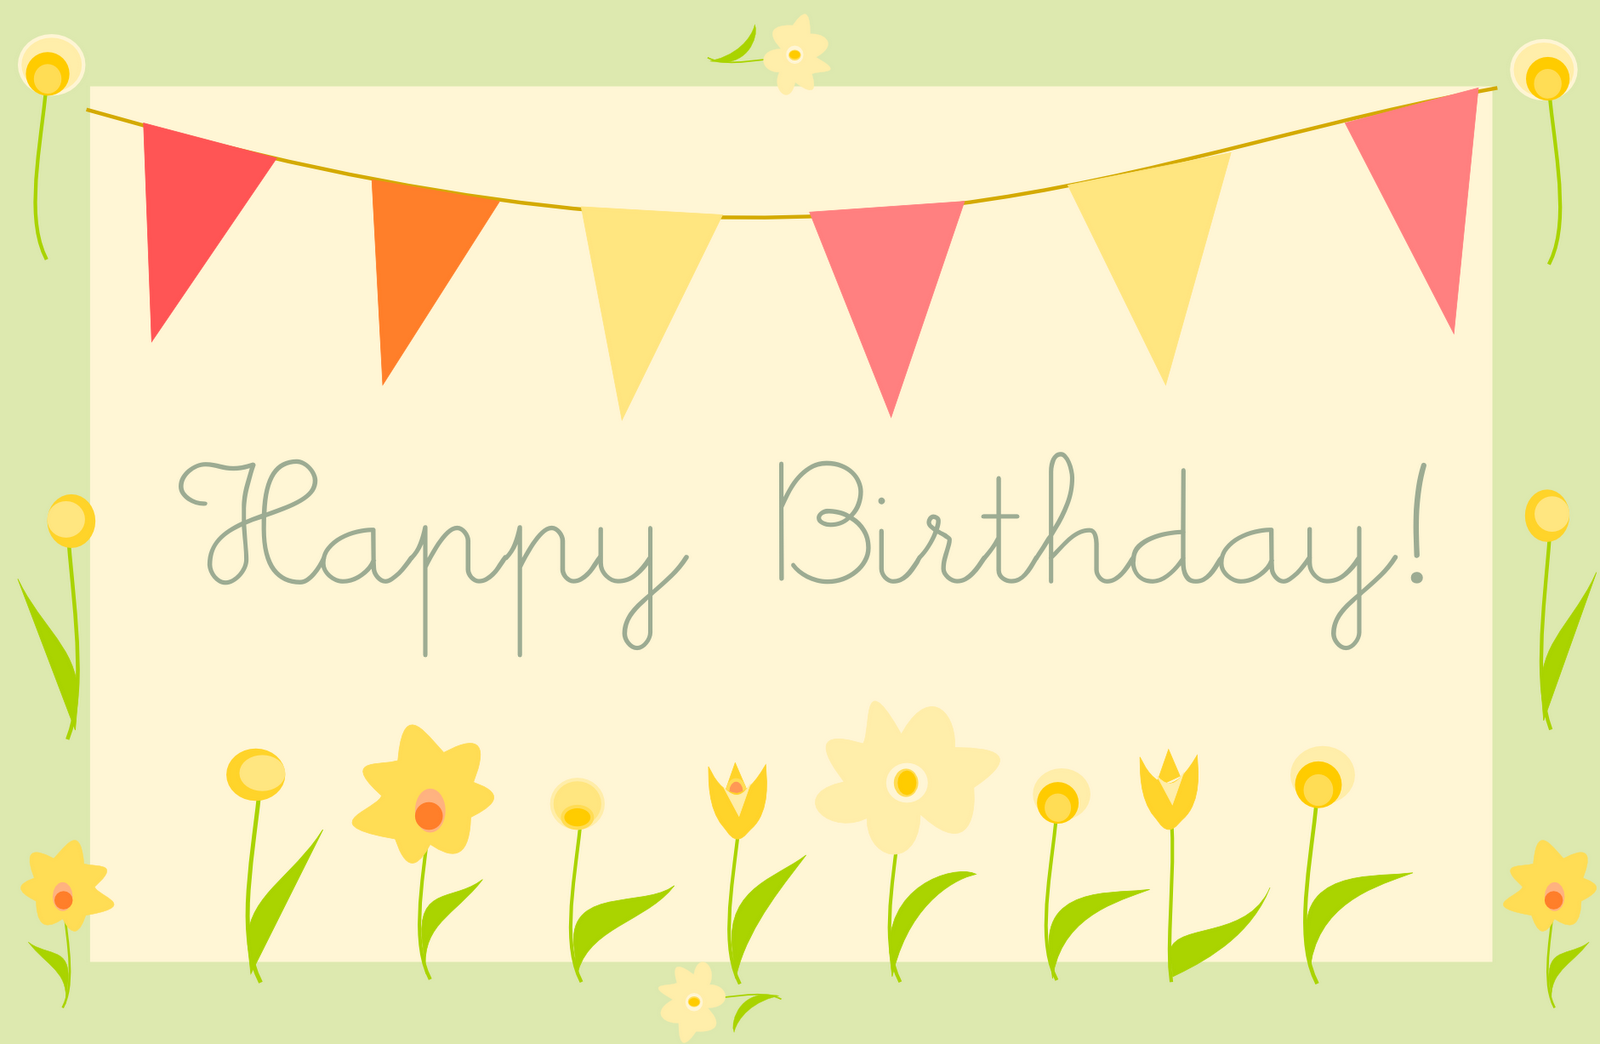 12 free printable birthday cards for everyone - 35 happy birthday cards ...